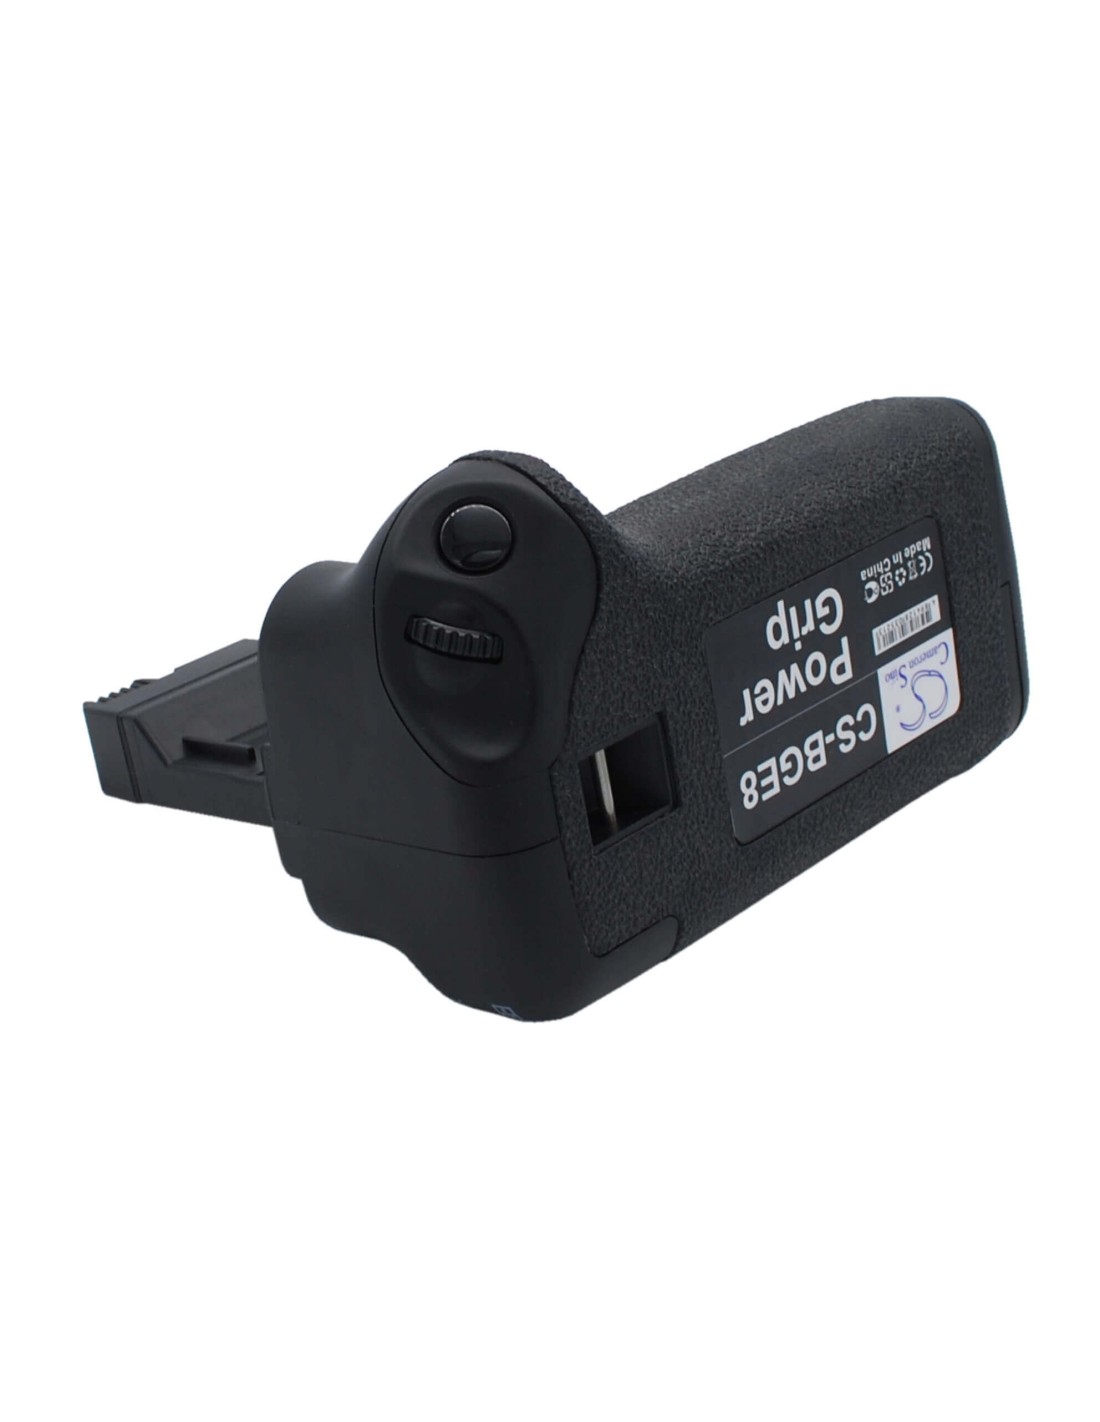 Battery Grip for Canon, Eos 550d Replaces model:- Bg-e8